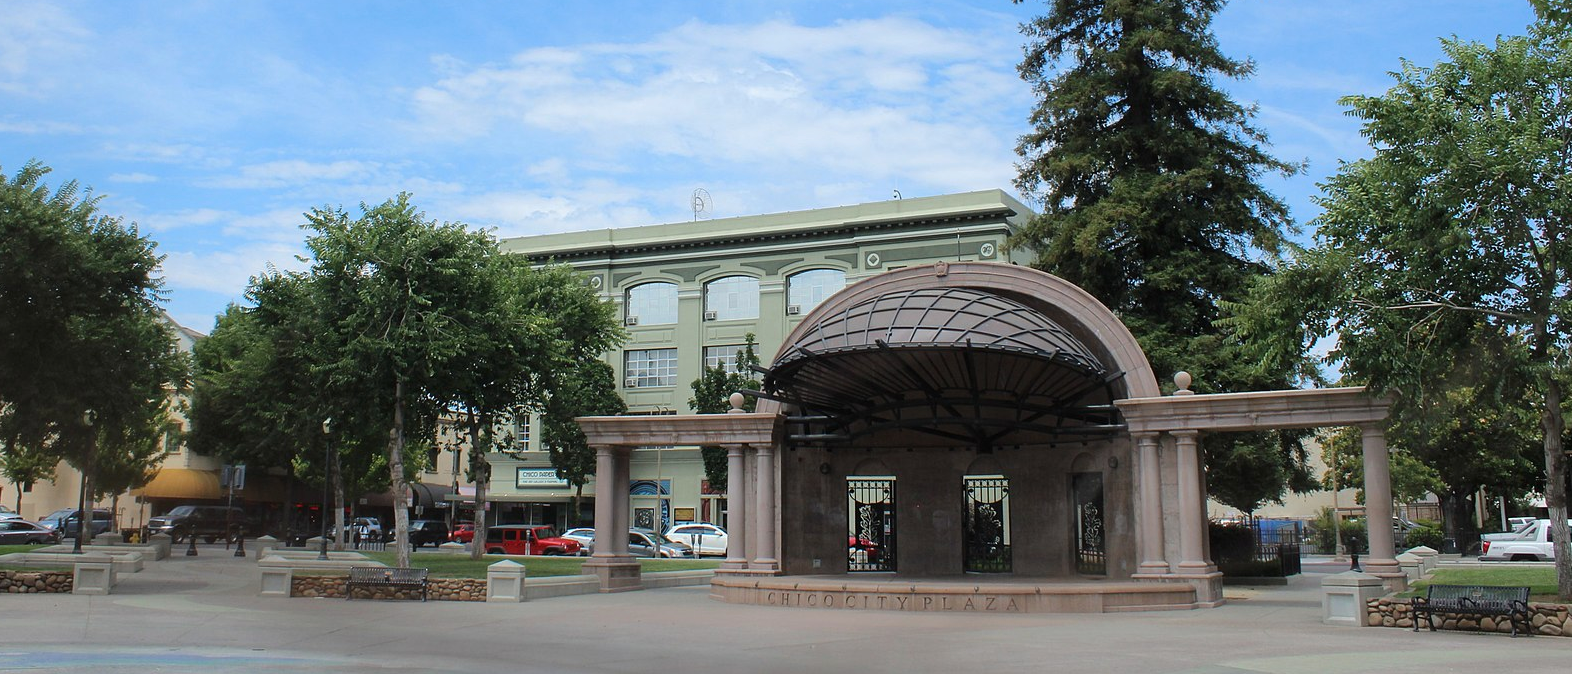 A gazebo in a city square surrounded by trees and buildings
